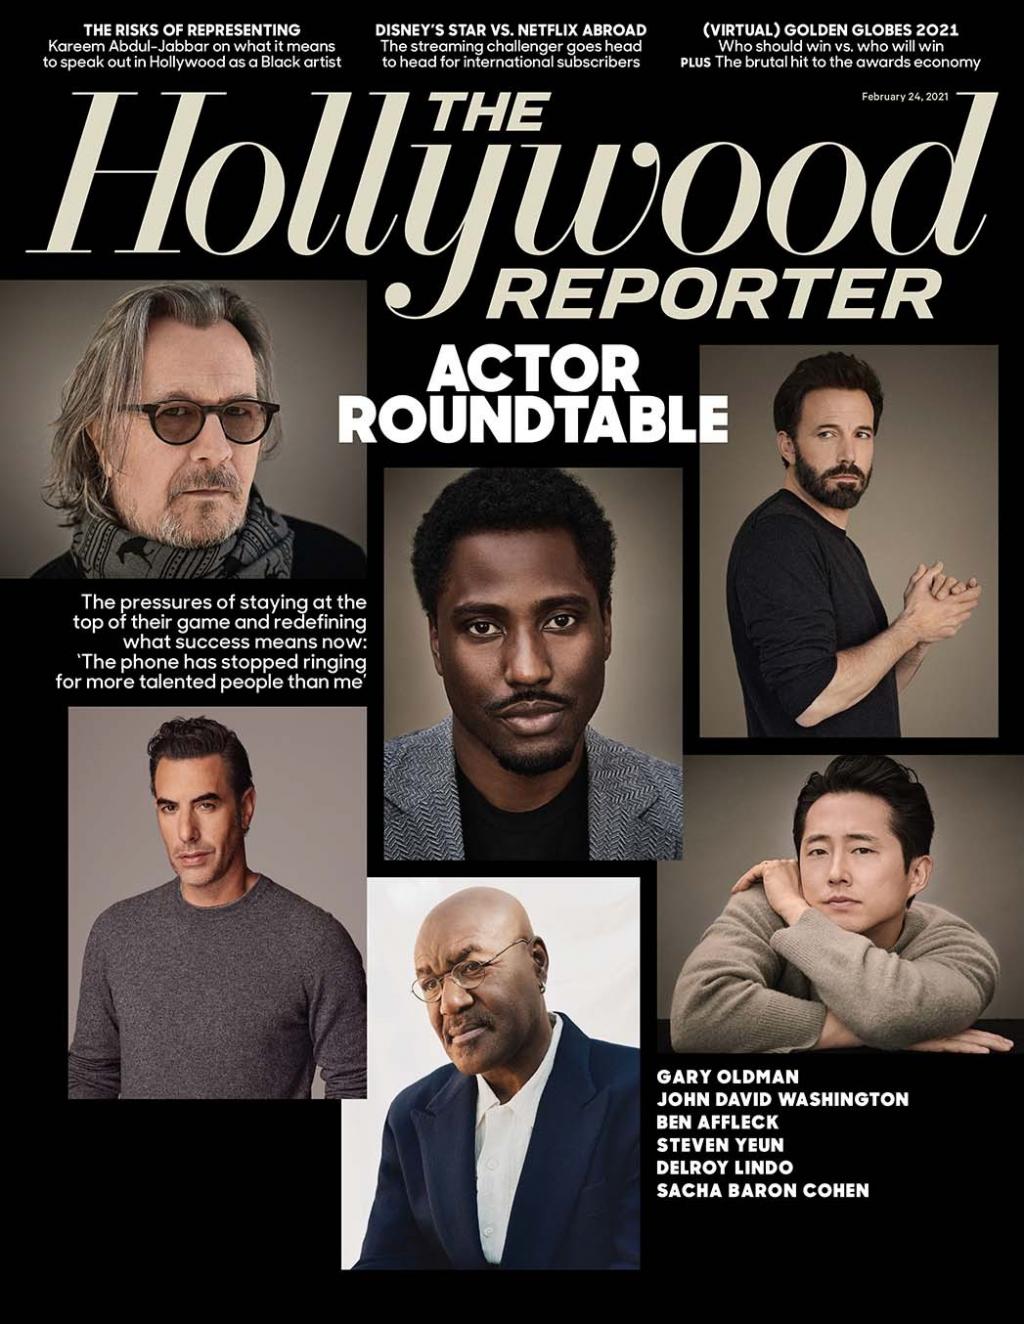 THR-Cover-8cover.hires-2021-1614124262-compressed.jpg